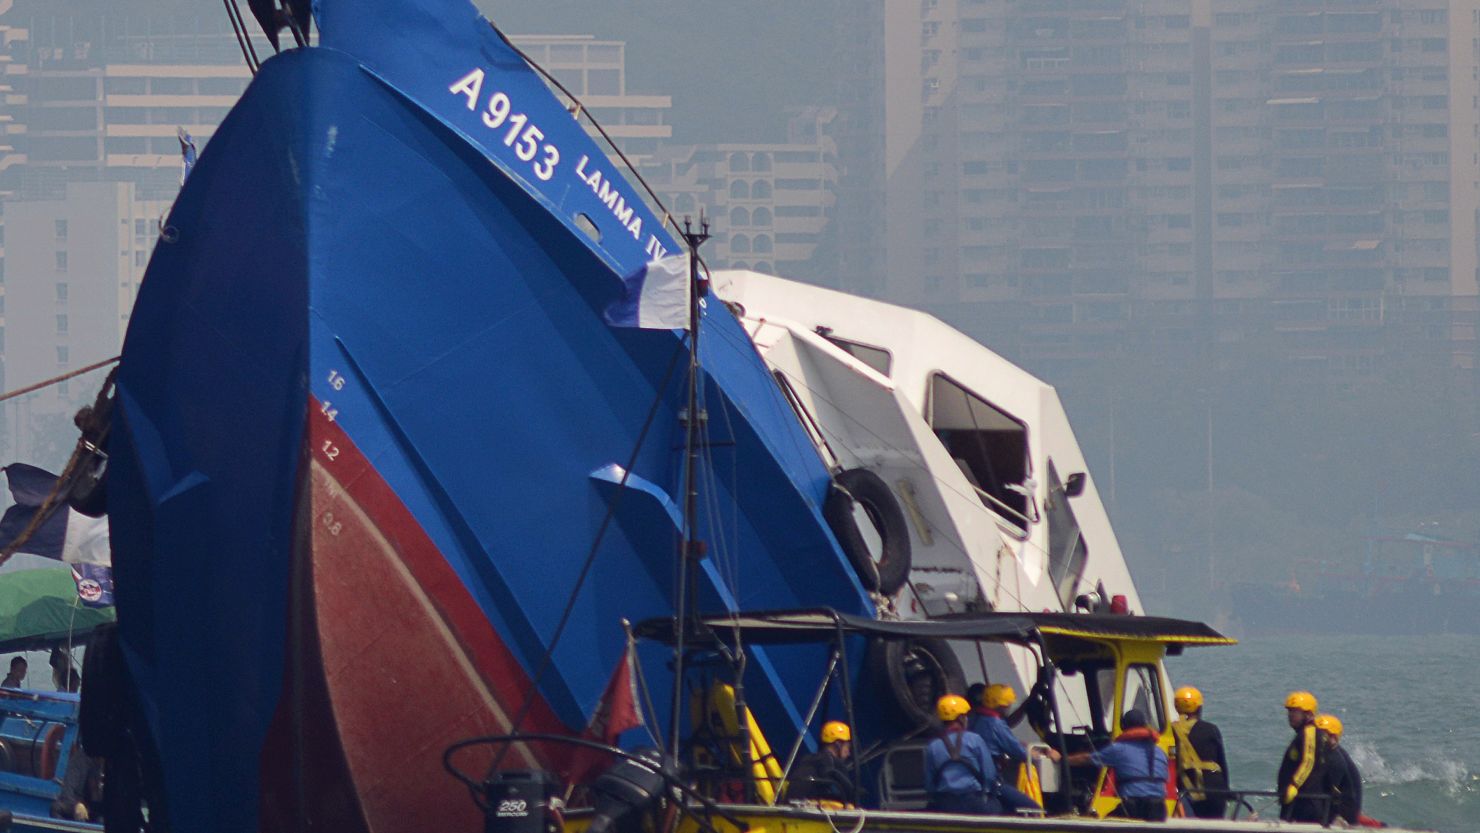 Thirty nine people were killed in Hong Kong's deadliest maritime accident in decades, on October 1.